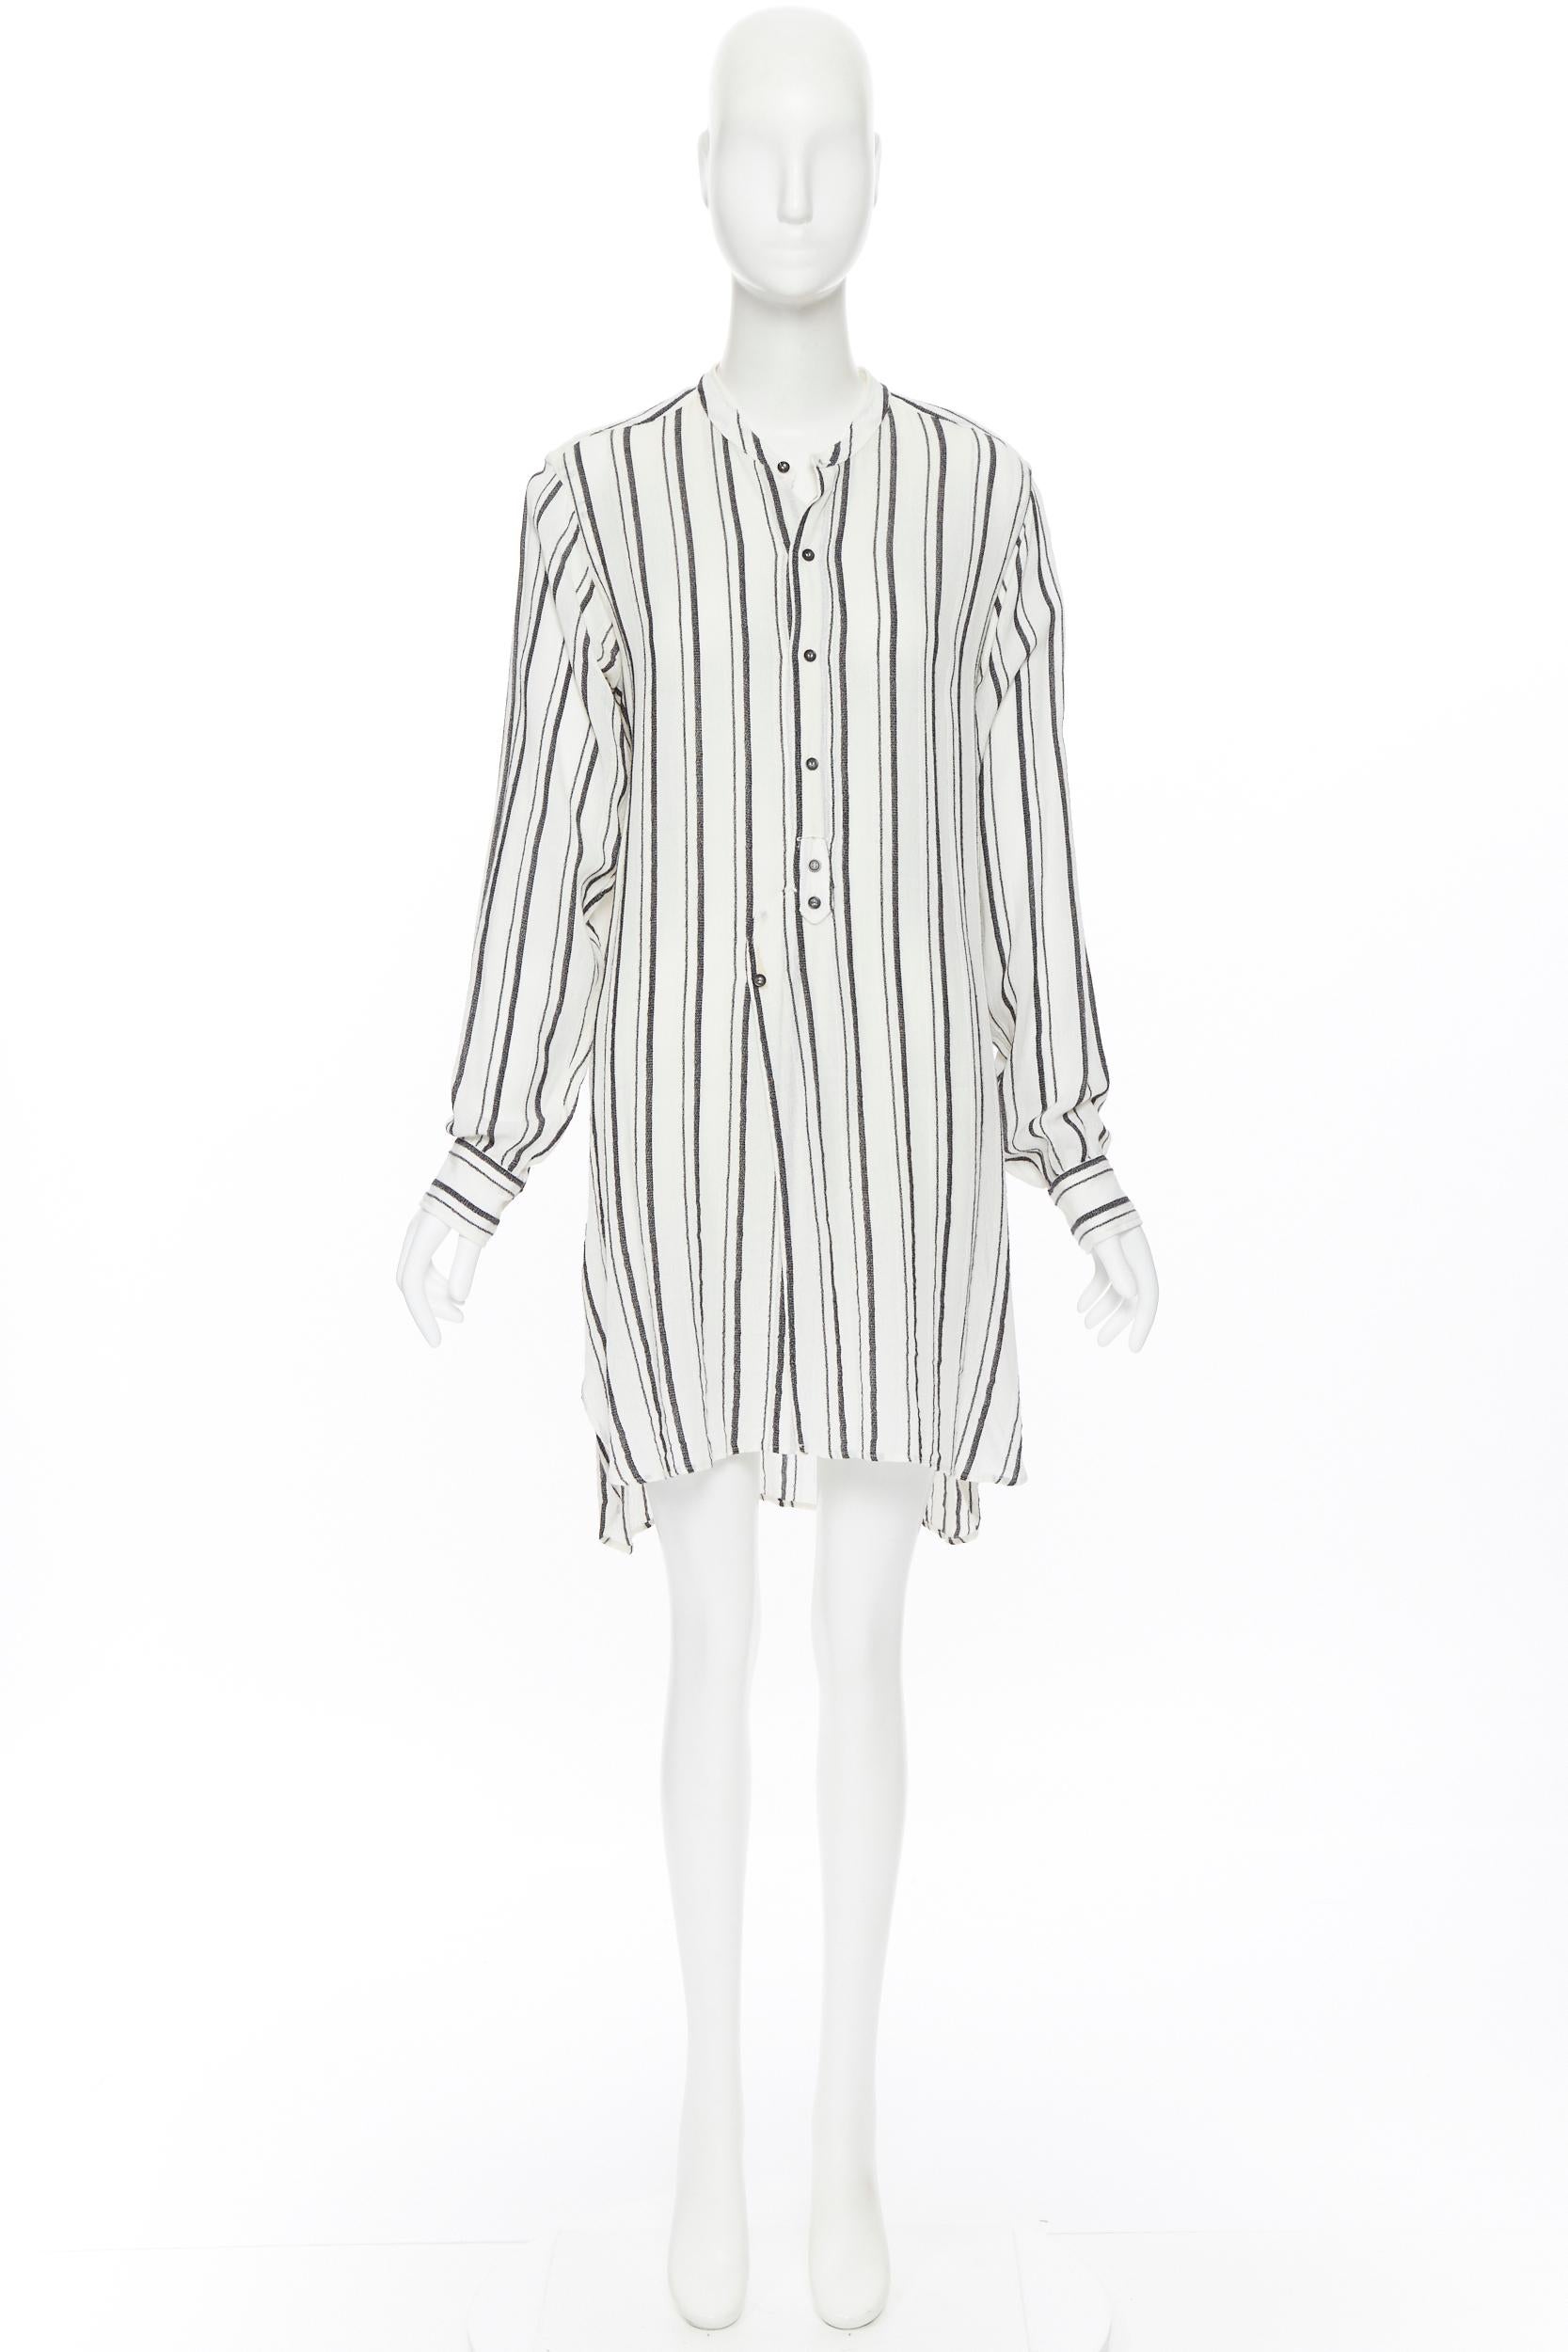 ISABEL MARANT viscose cotton blend grey beige stripe tunic casual dress Fr38 
Reference: CRTI/A00255 
Brand: Isabel Marant 
Designer: Isabel Marant 
Material: Viscose 
Color: Beige 
Pattern: Striped 
Closure: Button 
Made in: Bulgaria 

CONDITION: